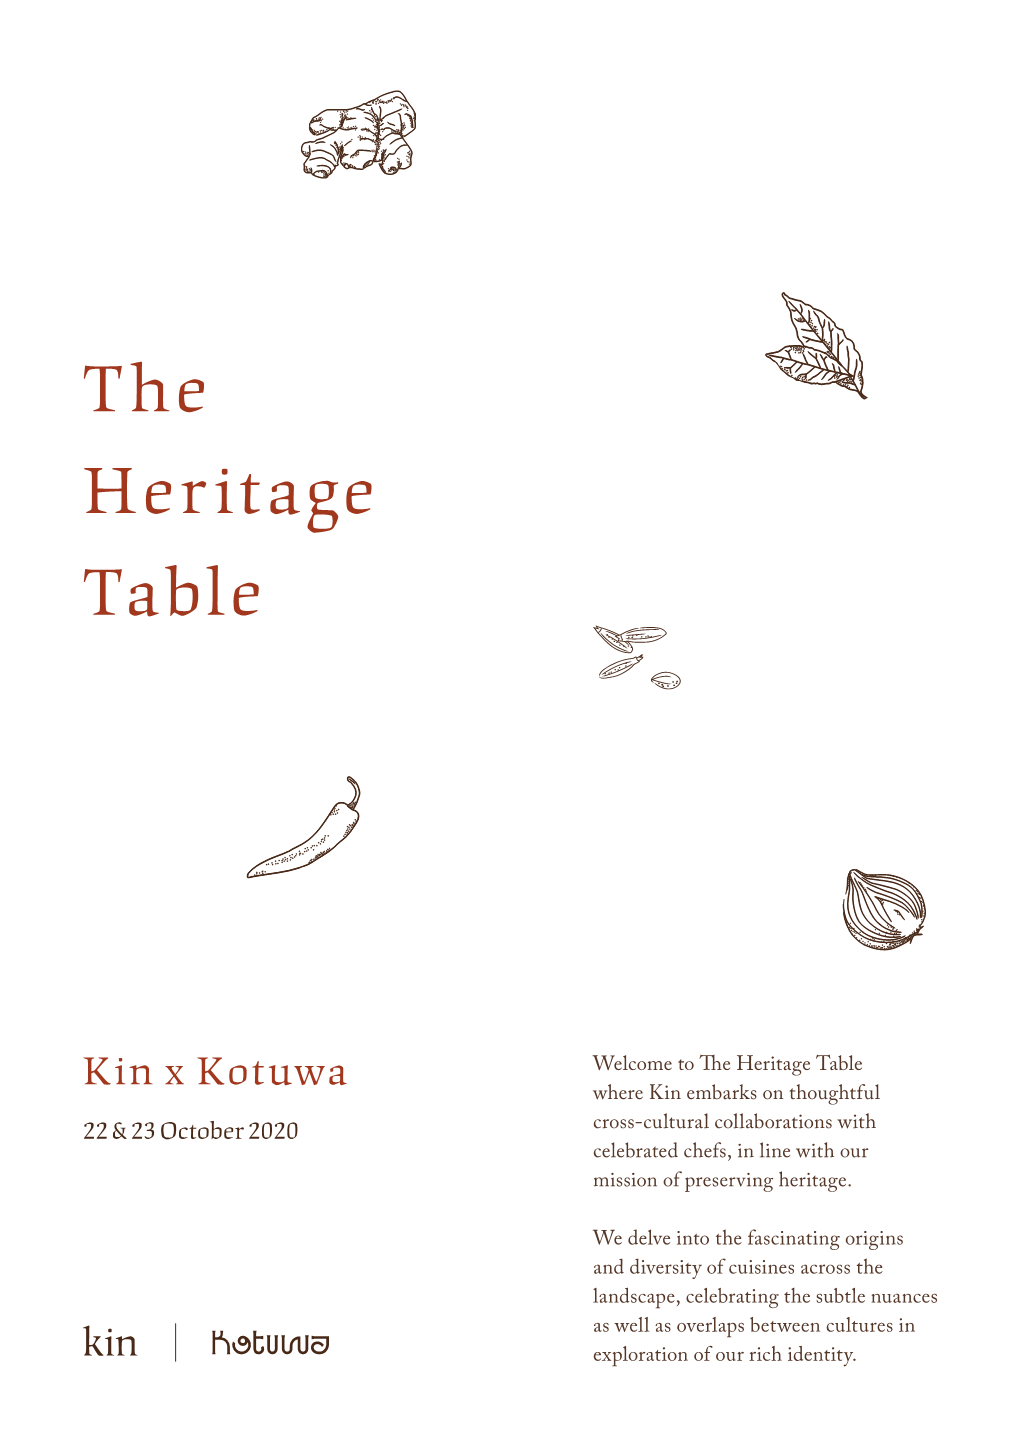 The Heritage Table